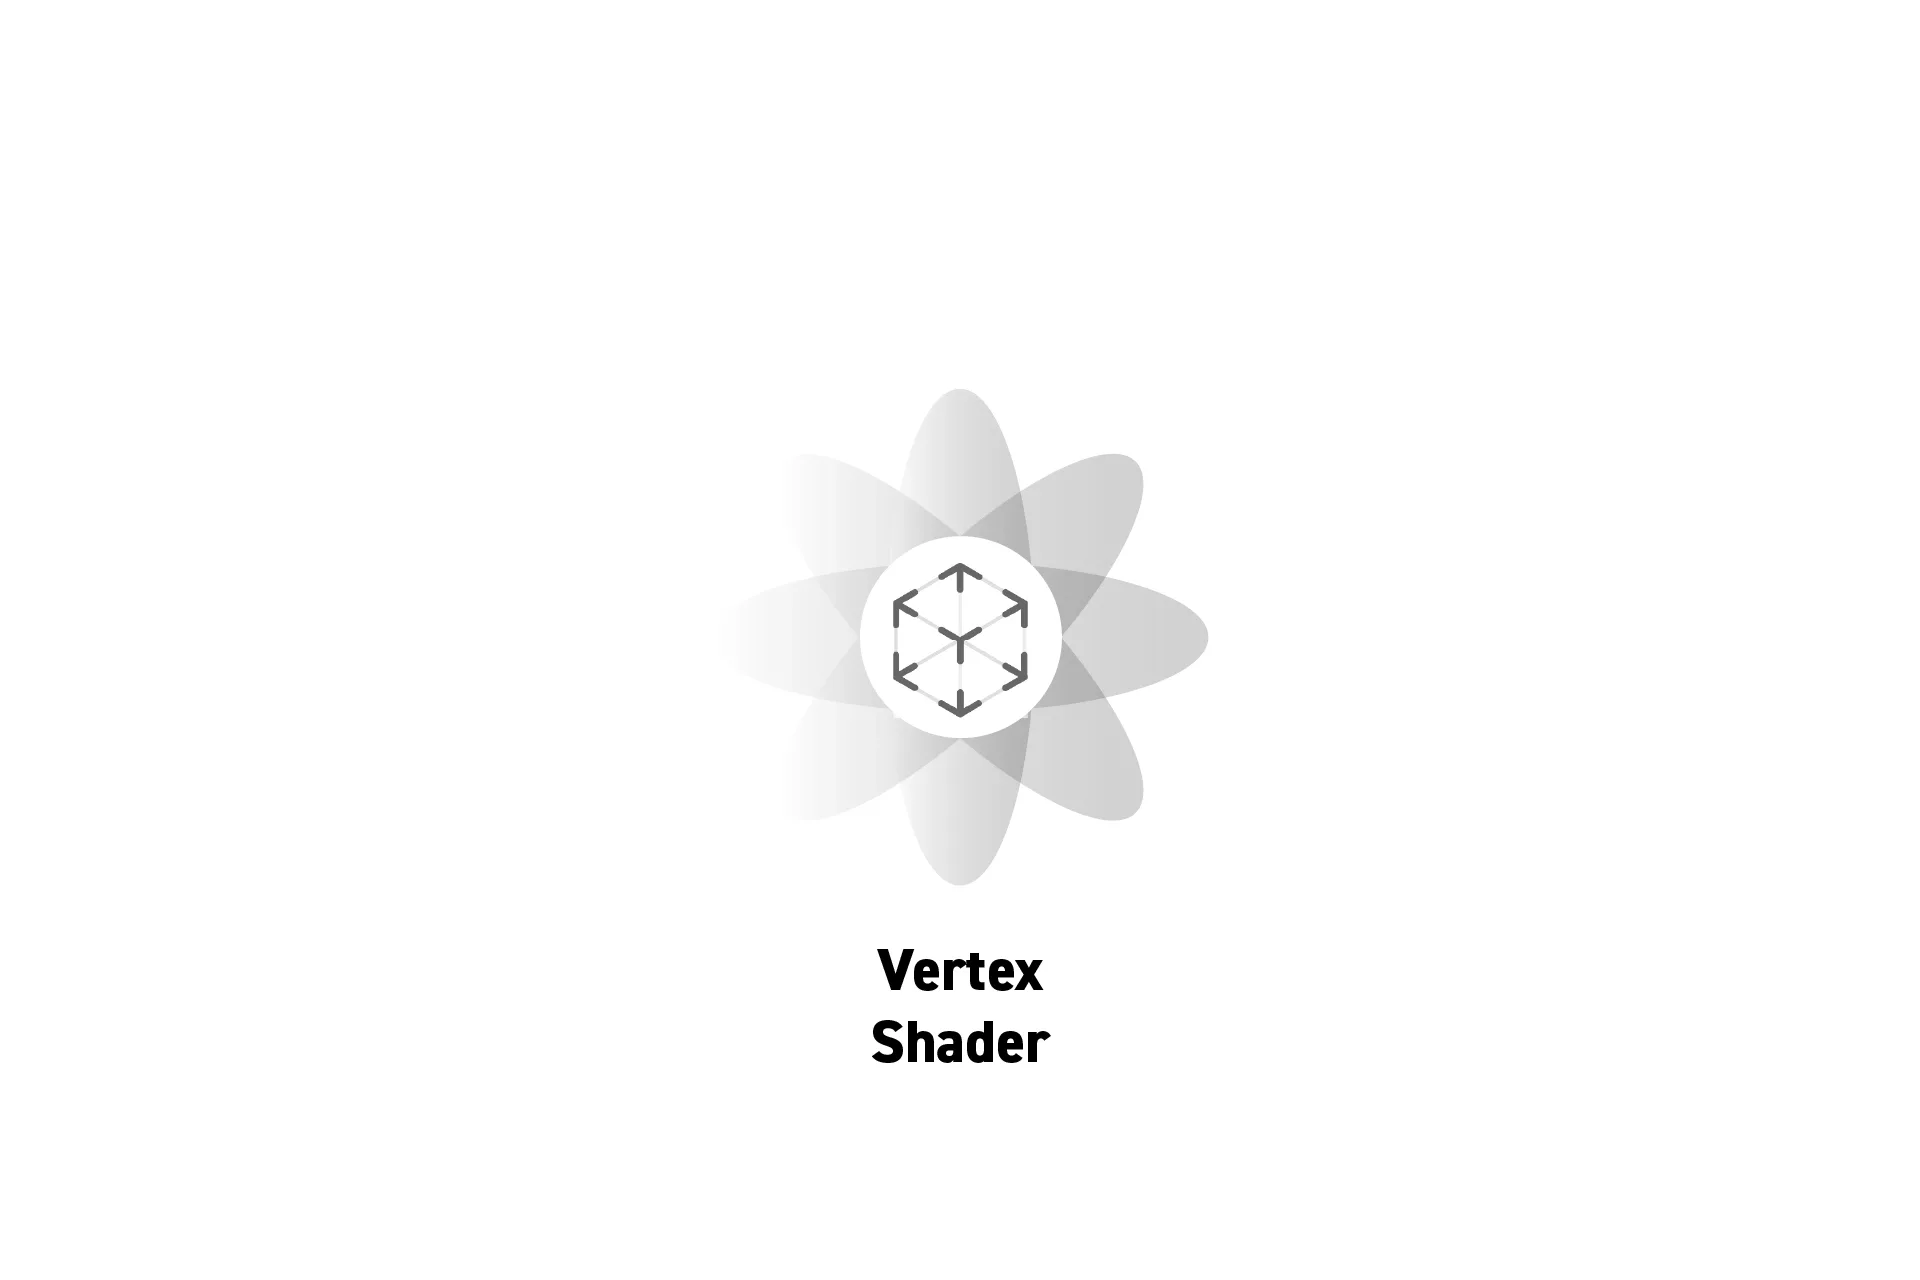 A flower that represents spatial computing with the text "Vertex Shader" beneath it.